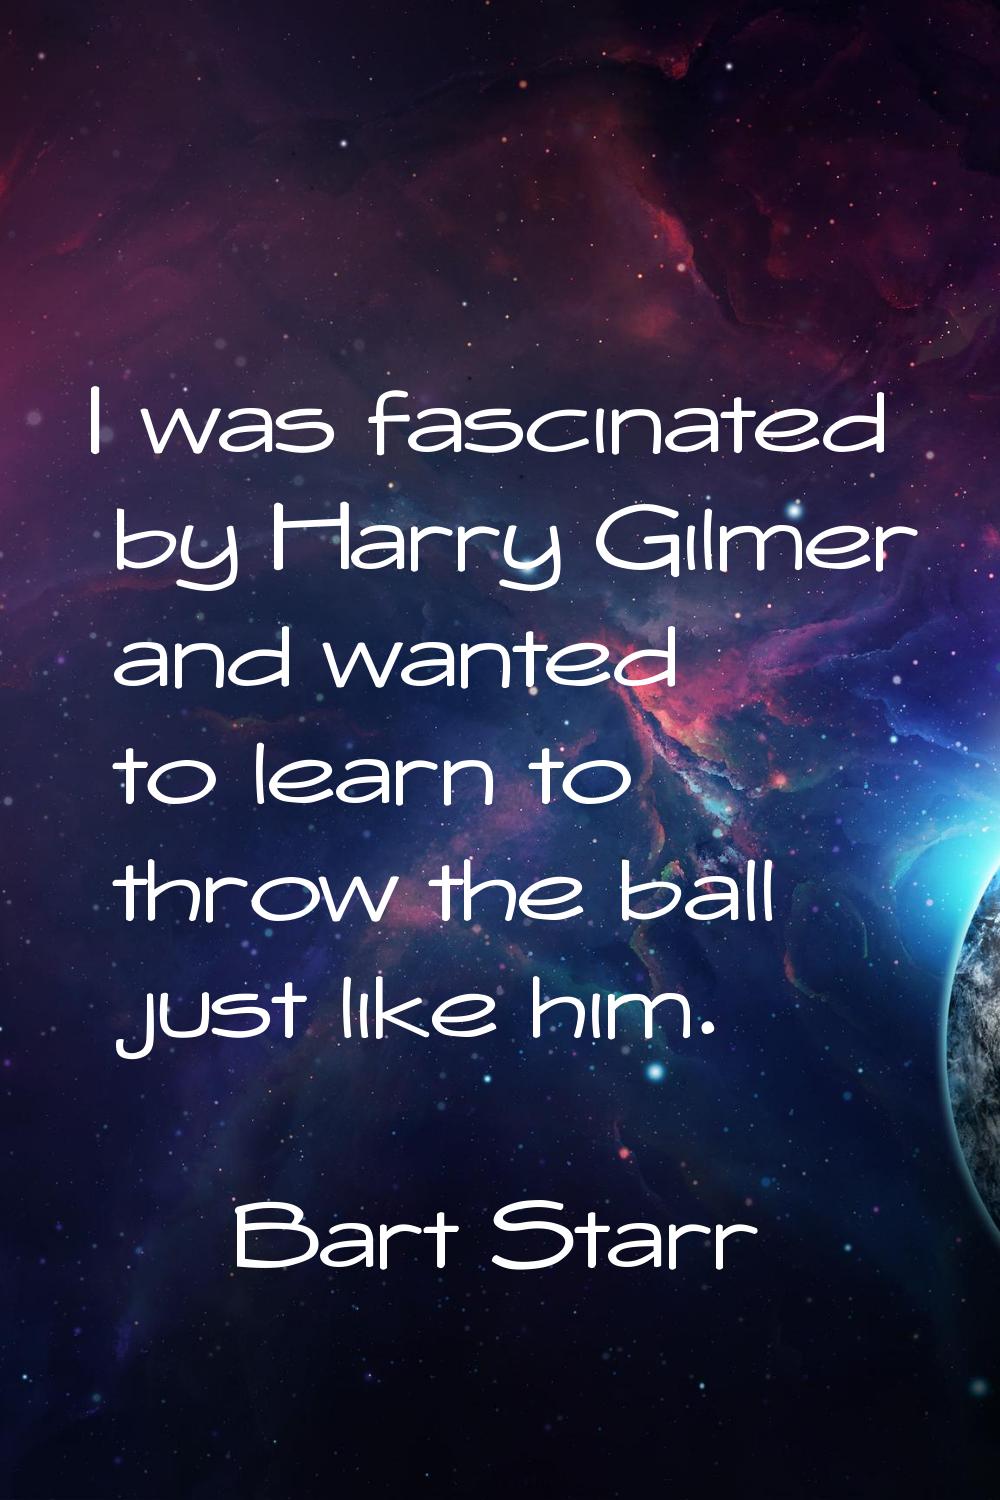 I was fascinated by Harry Gilmer and wanted to learn to throw the ball just like him.